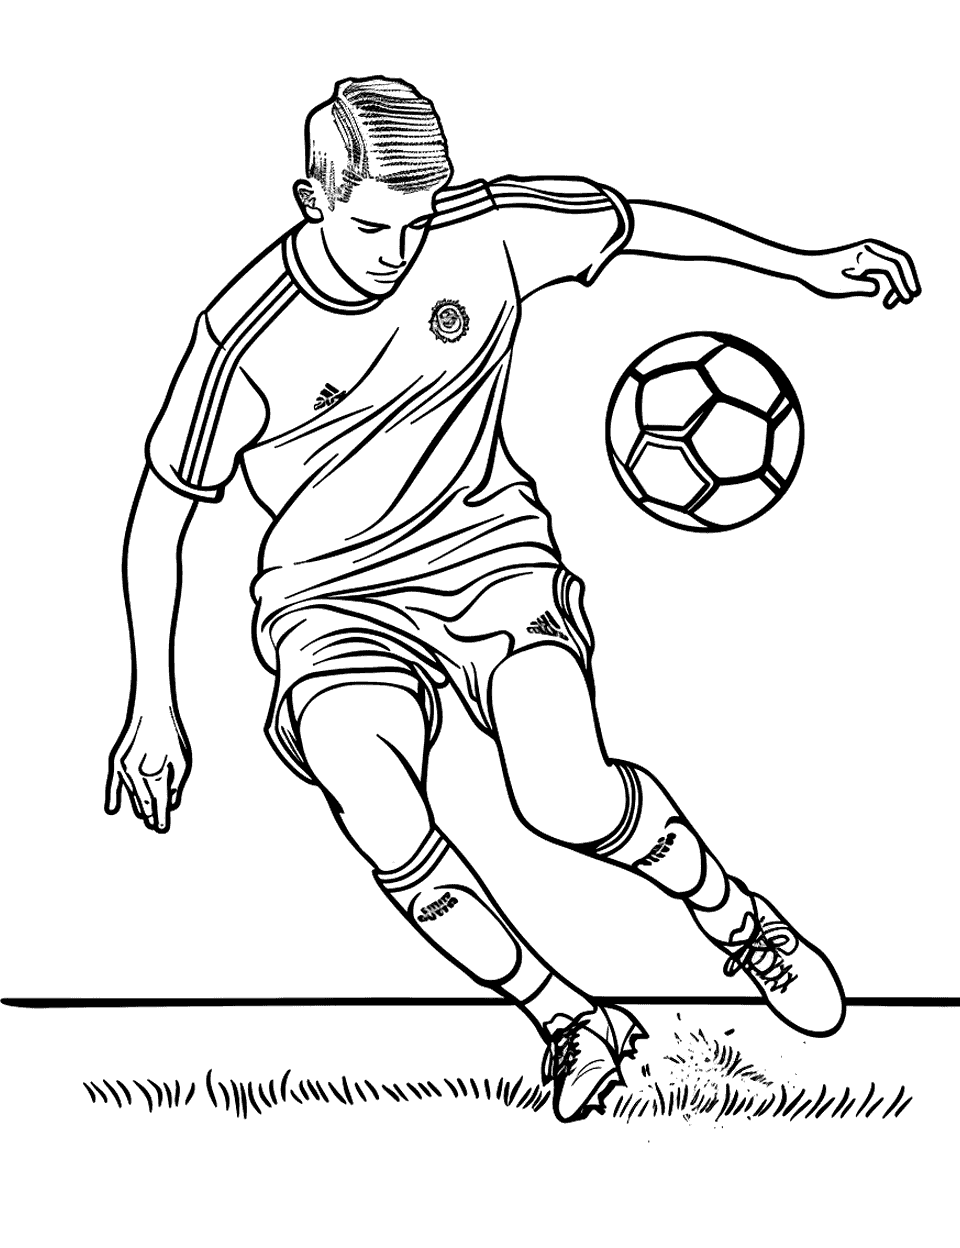 Midfield Battle for the Ball Soccer Coloring Page - A player in battle for control of the soccer ball in midfield.